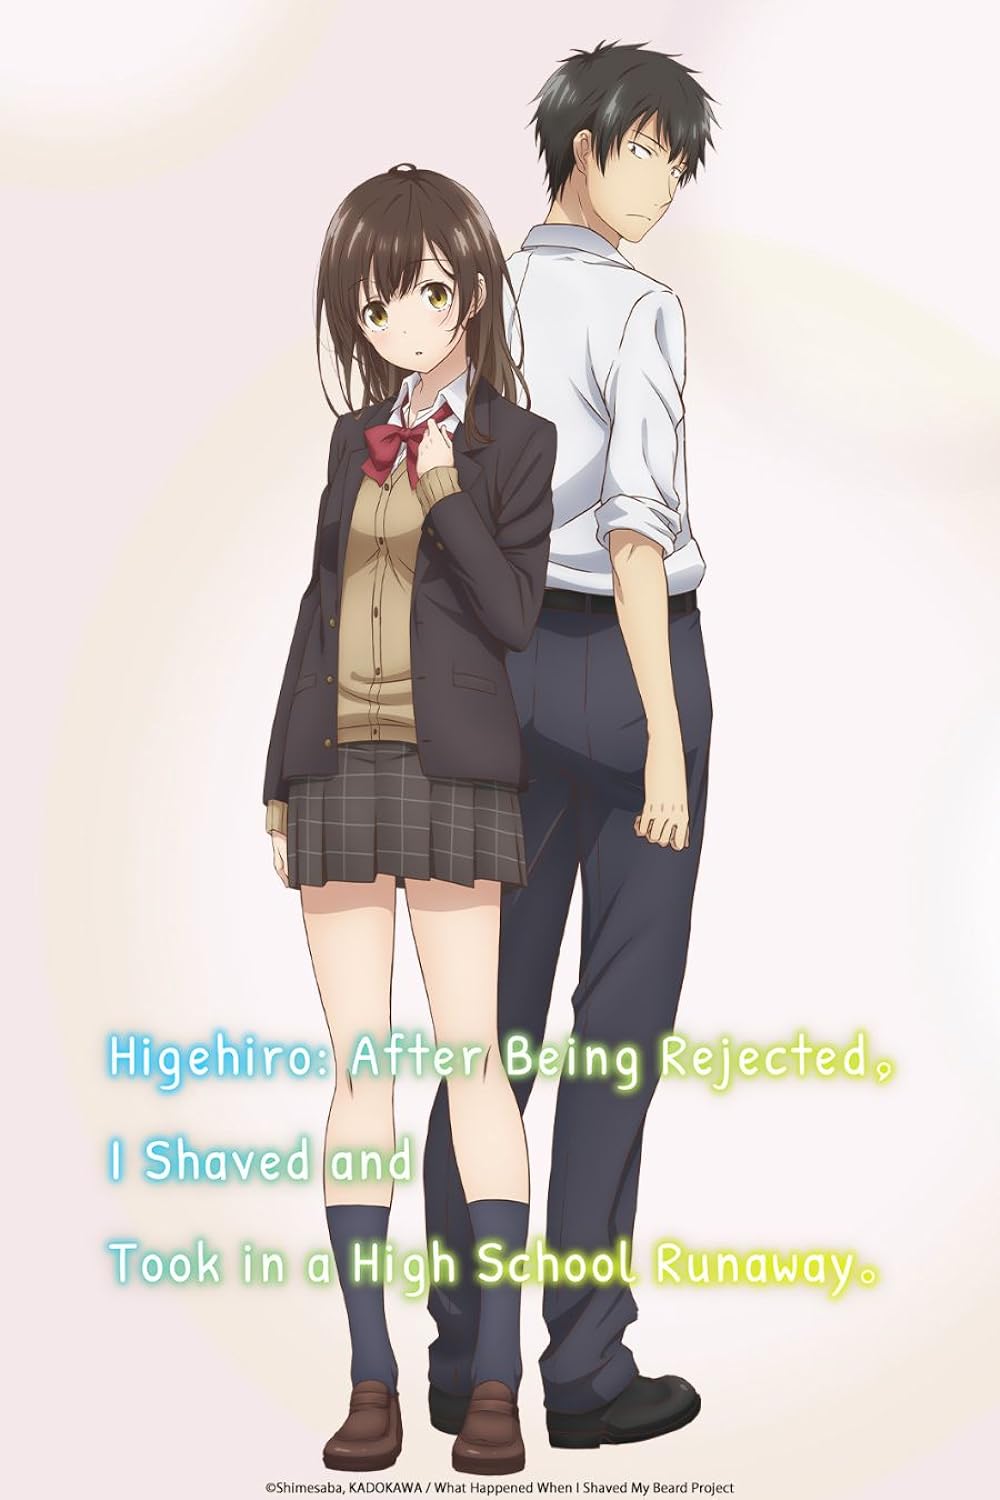 Higehiro: After Being Rejected, I Shaved and Took in a High School Runaway.